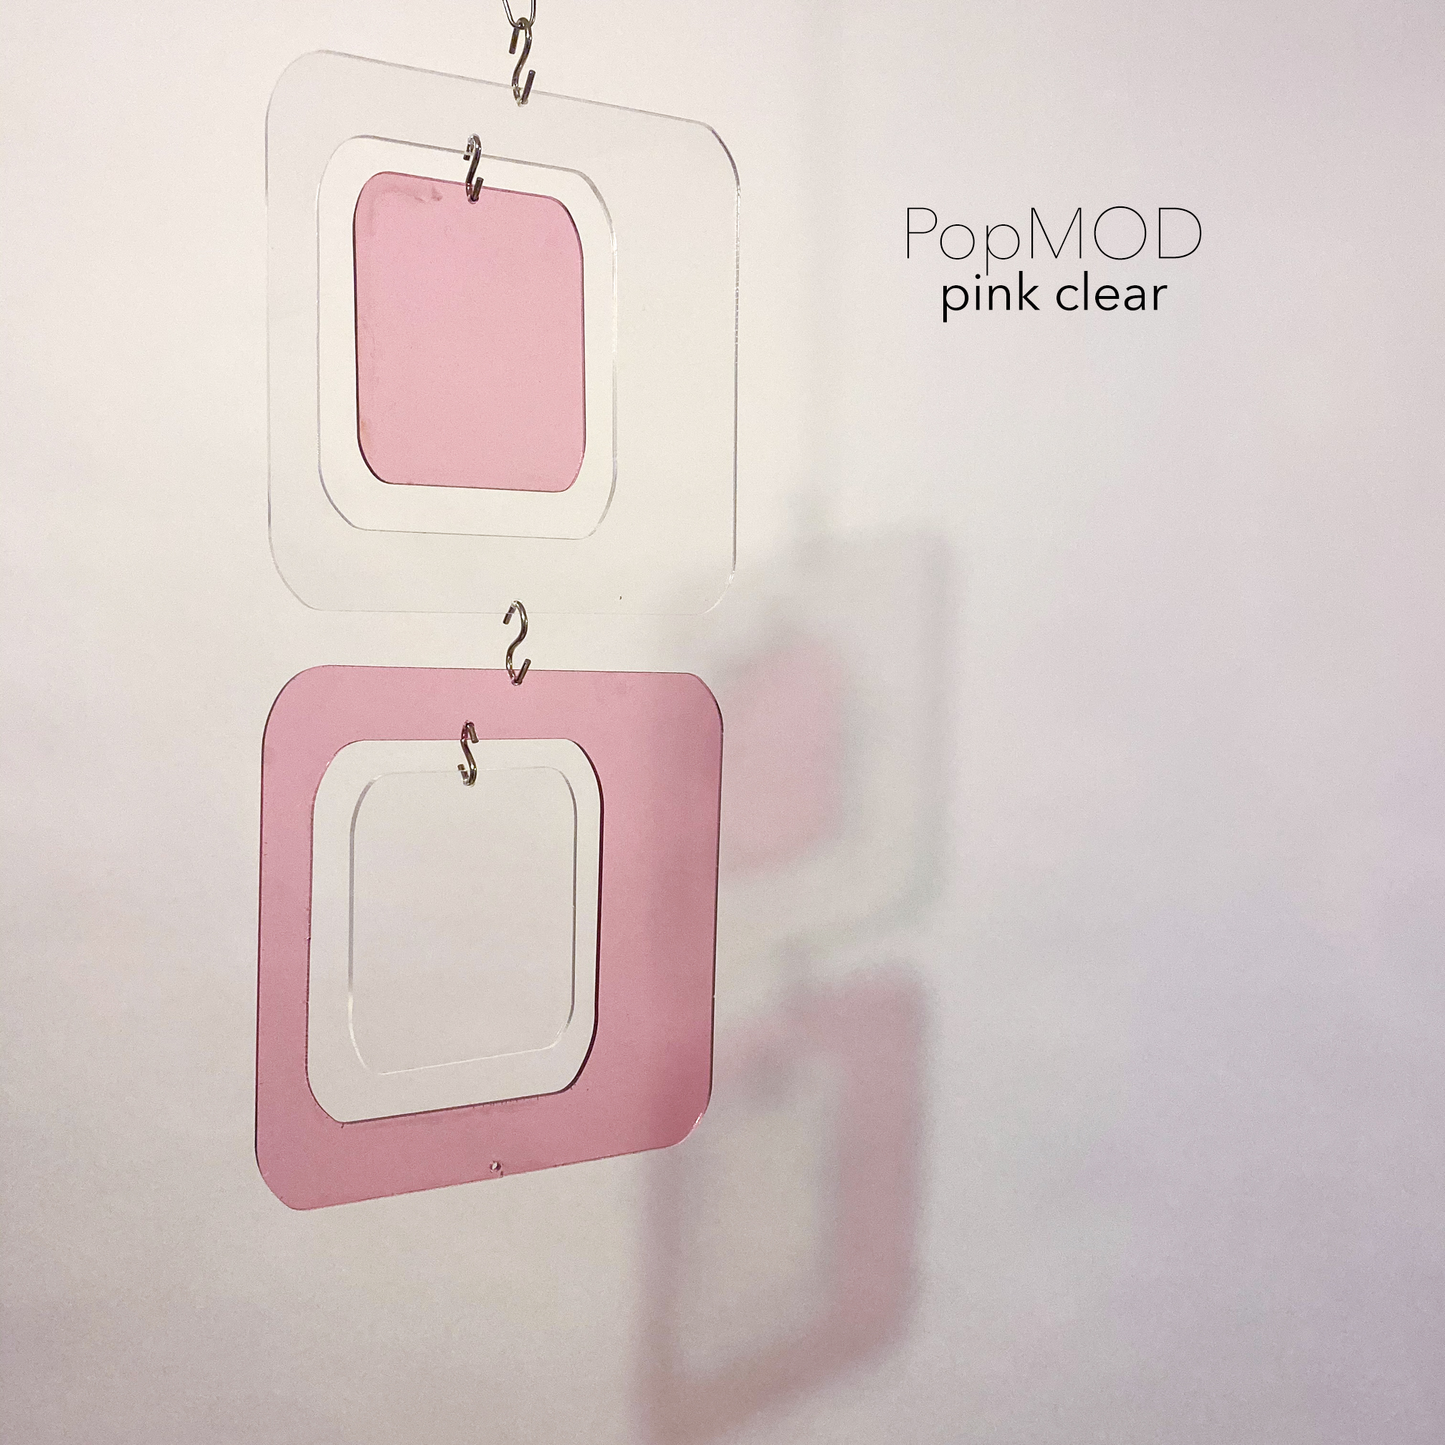 PopMOD DIY KITS - Pink and Clear Acrylic Coolsville Reflective Room Divider, Curtain, Partition, Wall Art, Mobile by AtomicMobiles.com